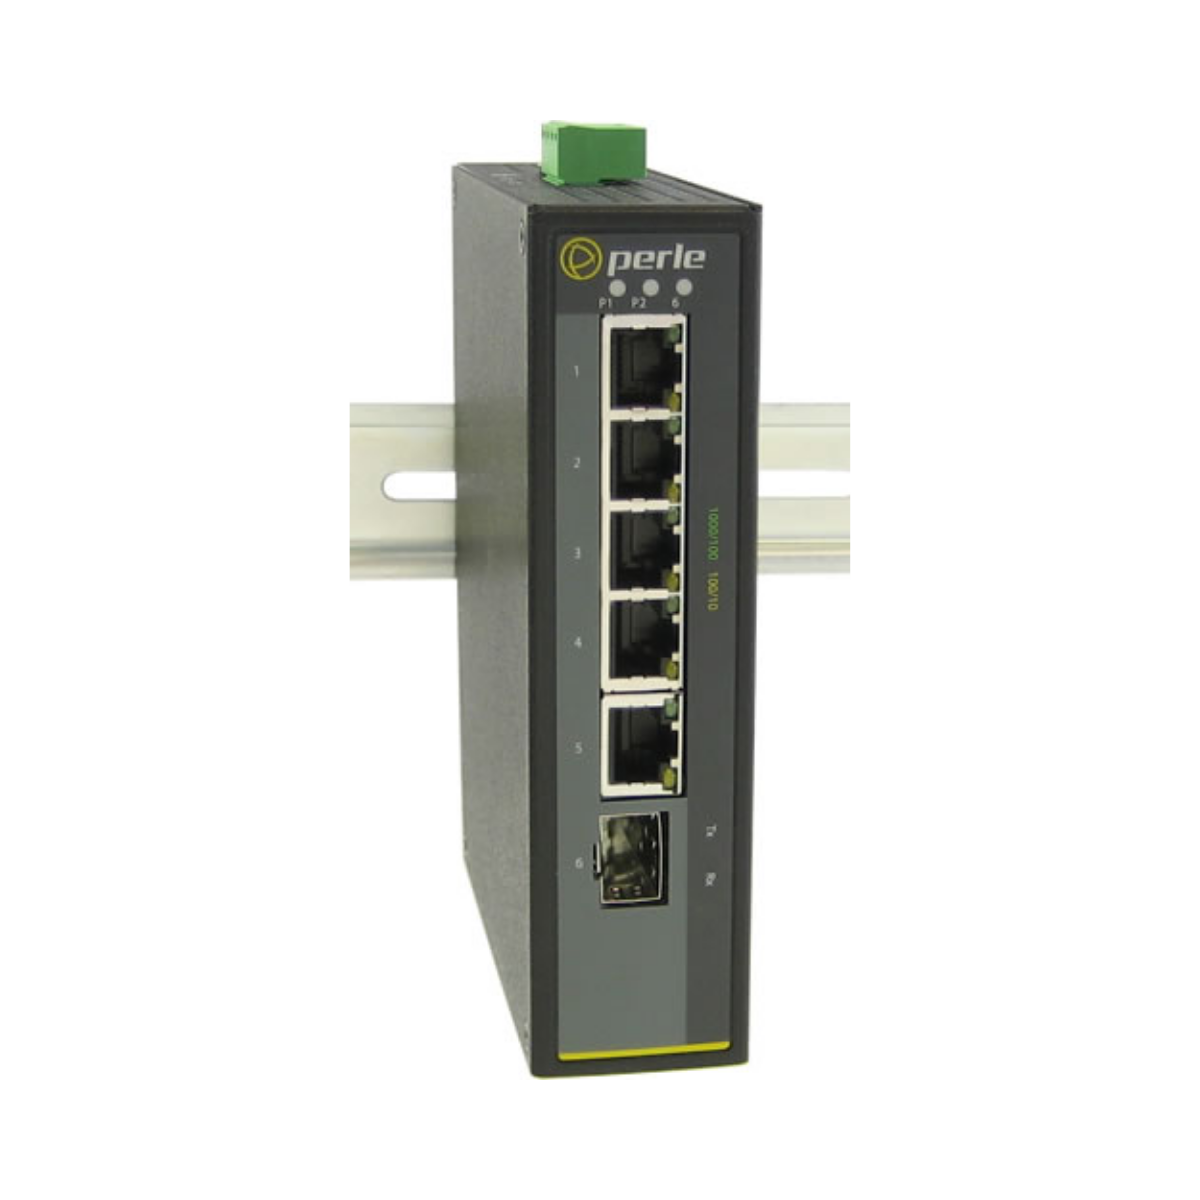 Perle IDS-105G-SFPXT Industrial Gigabit 5 to 7 Port Compact DIN Rail Switch